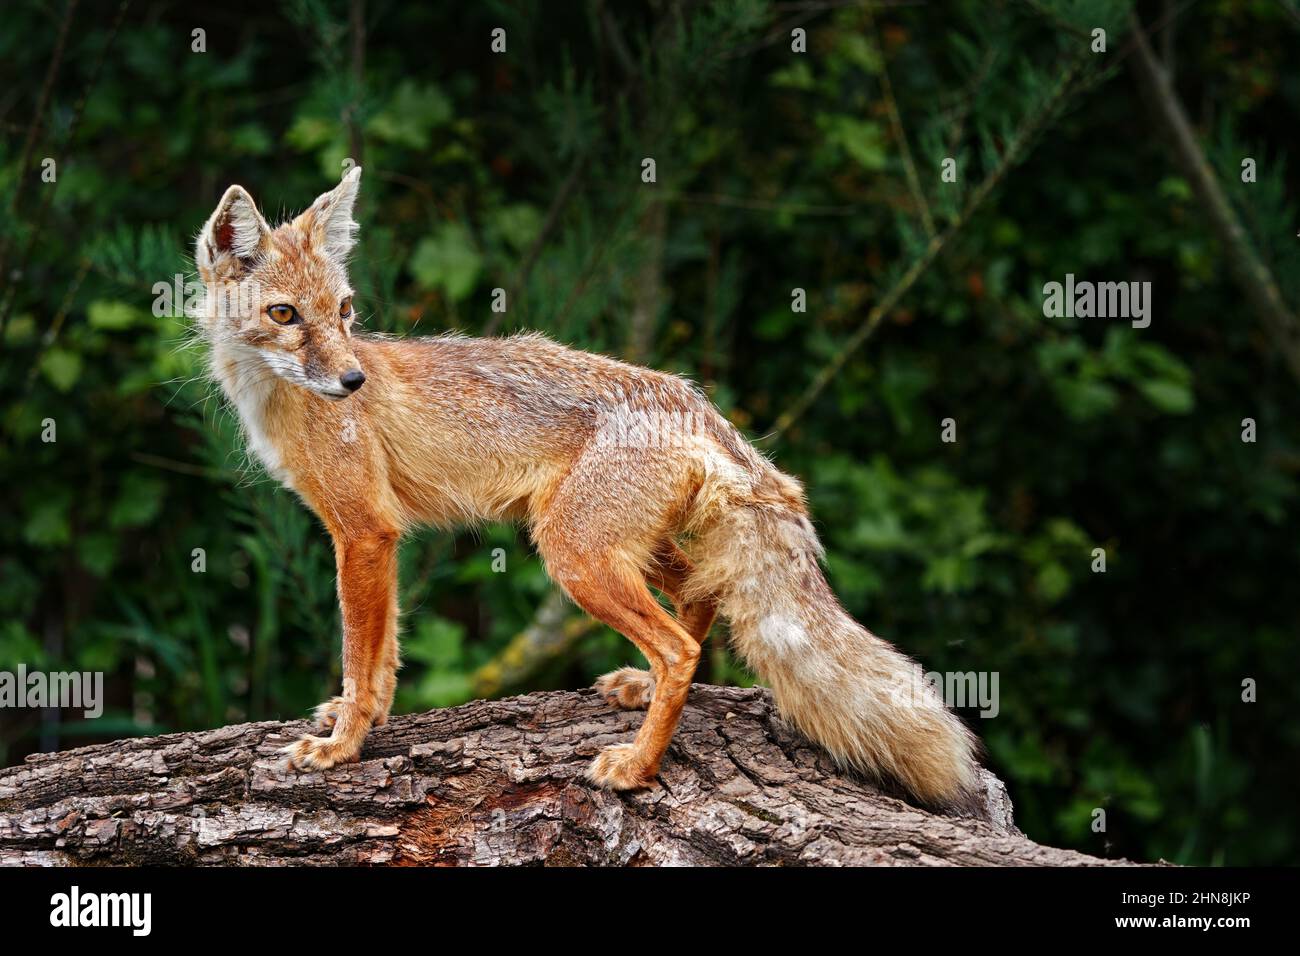 Corsac Fox, Vulpes corsac, in the nature stone mountain habitat, found in steppes and deserts in, Mongolia, Central Asia.  Fox in the nature habitat. Stock Photo